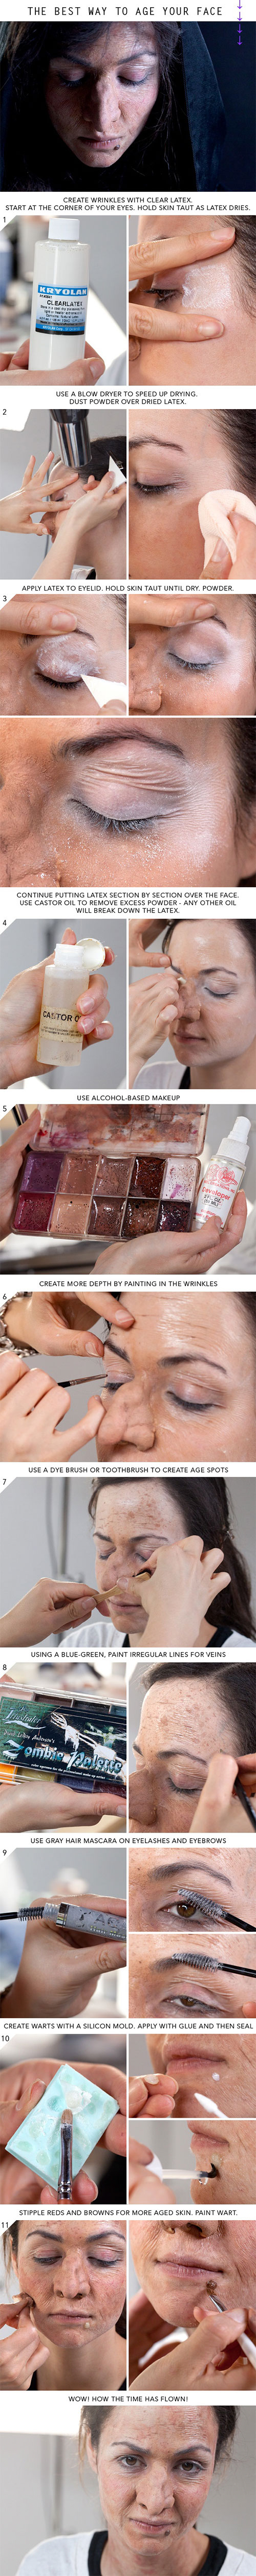 15-Step-By-Step-Halloween-Make-Up-Tutorials-For-Beginners-Learners-2014-16